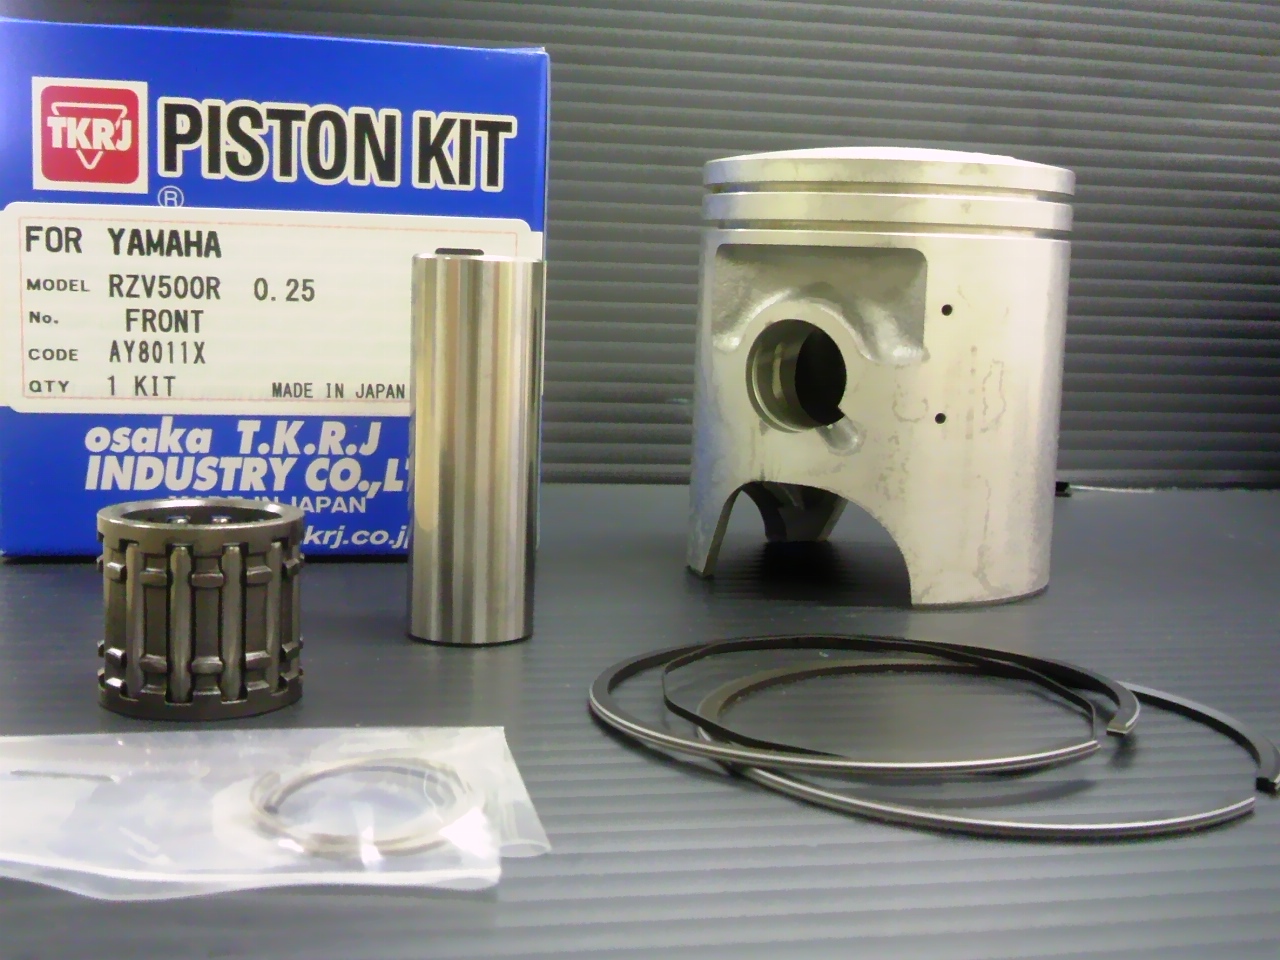 T.K.R.J. / MOTORCYCLE and OUTBOARD such as PISTON KIT and